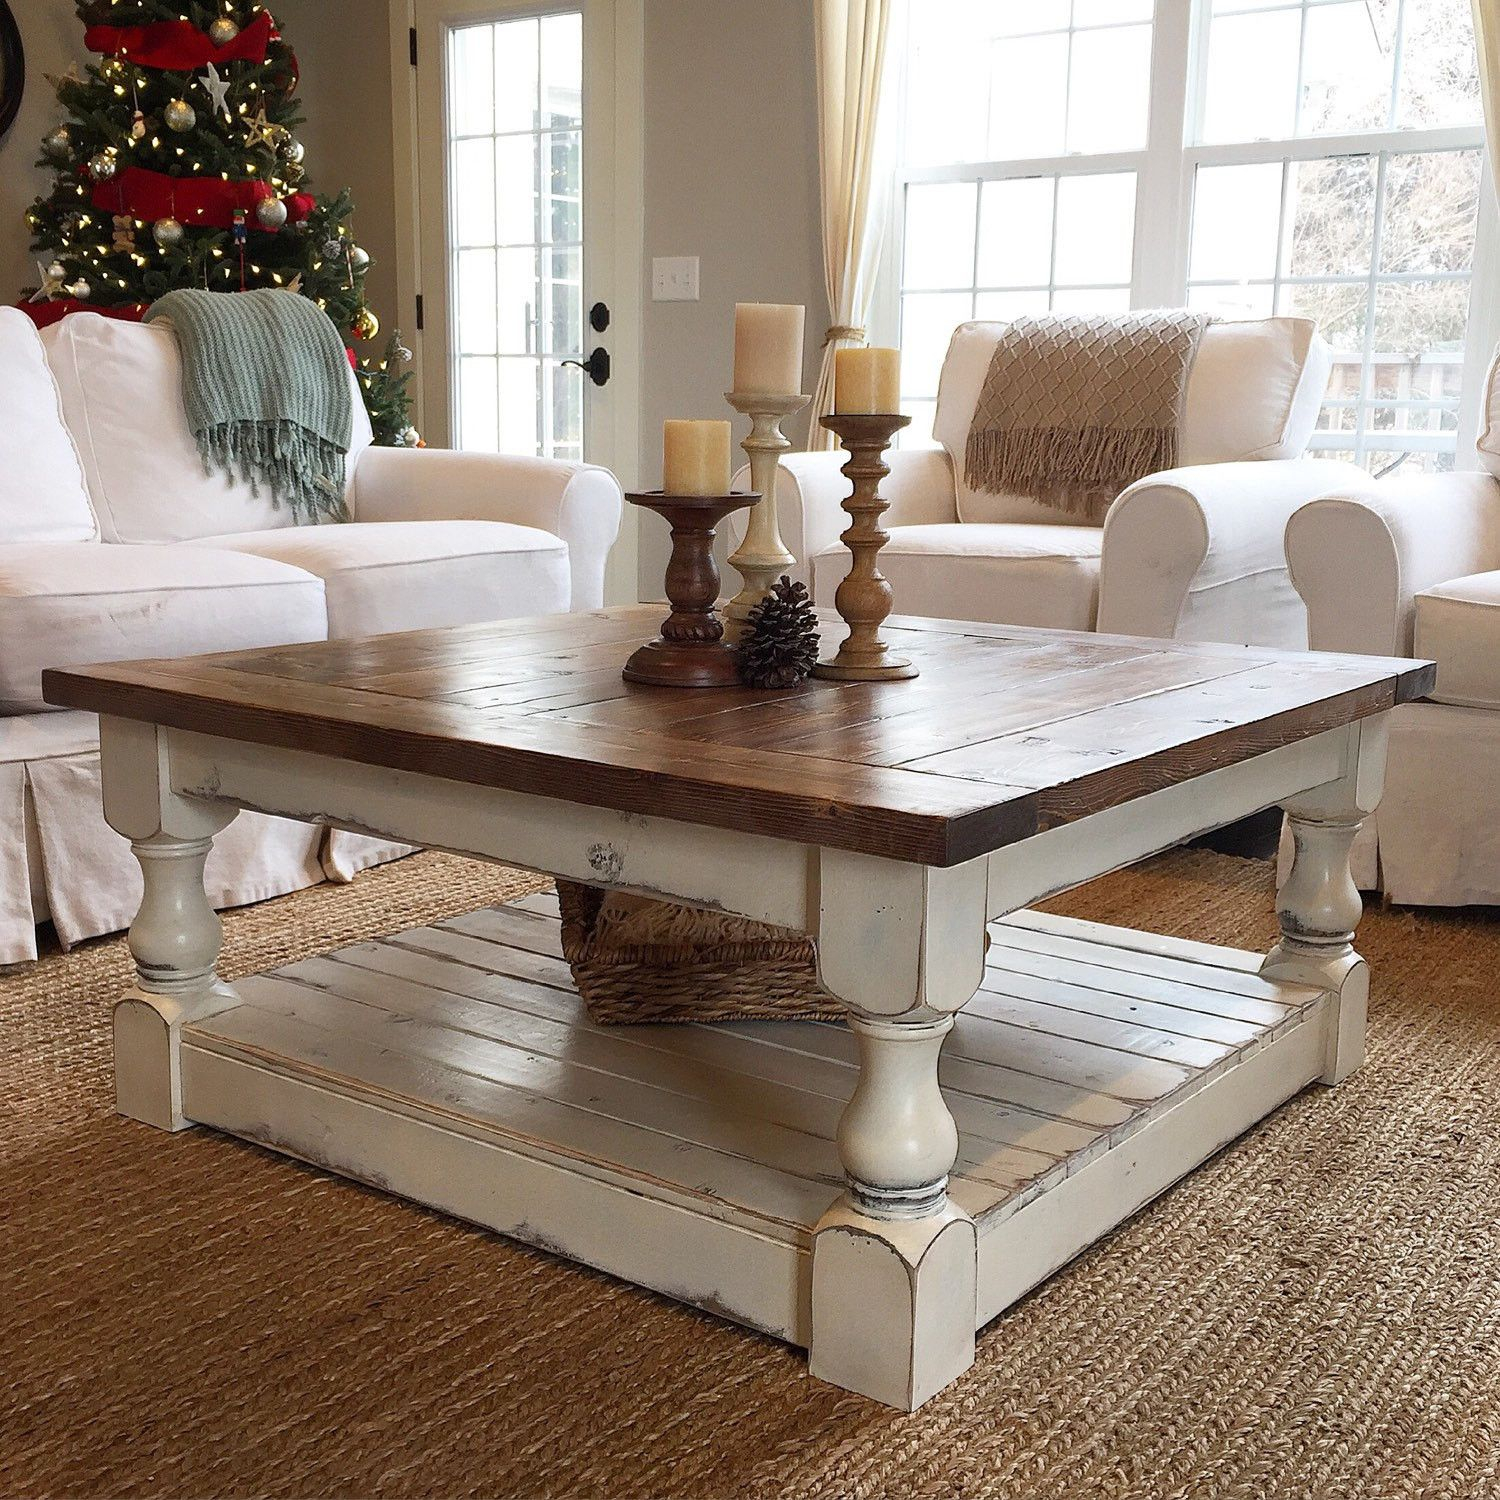 Farmhouse Harvest Table Nicholson Decorating Coffee Tables Home regarding proportions 1500 X 1500